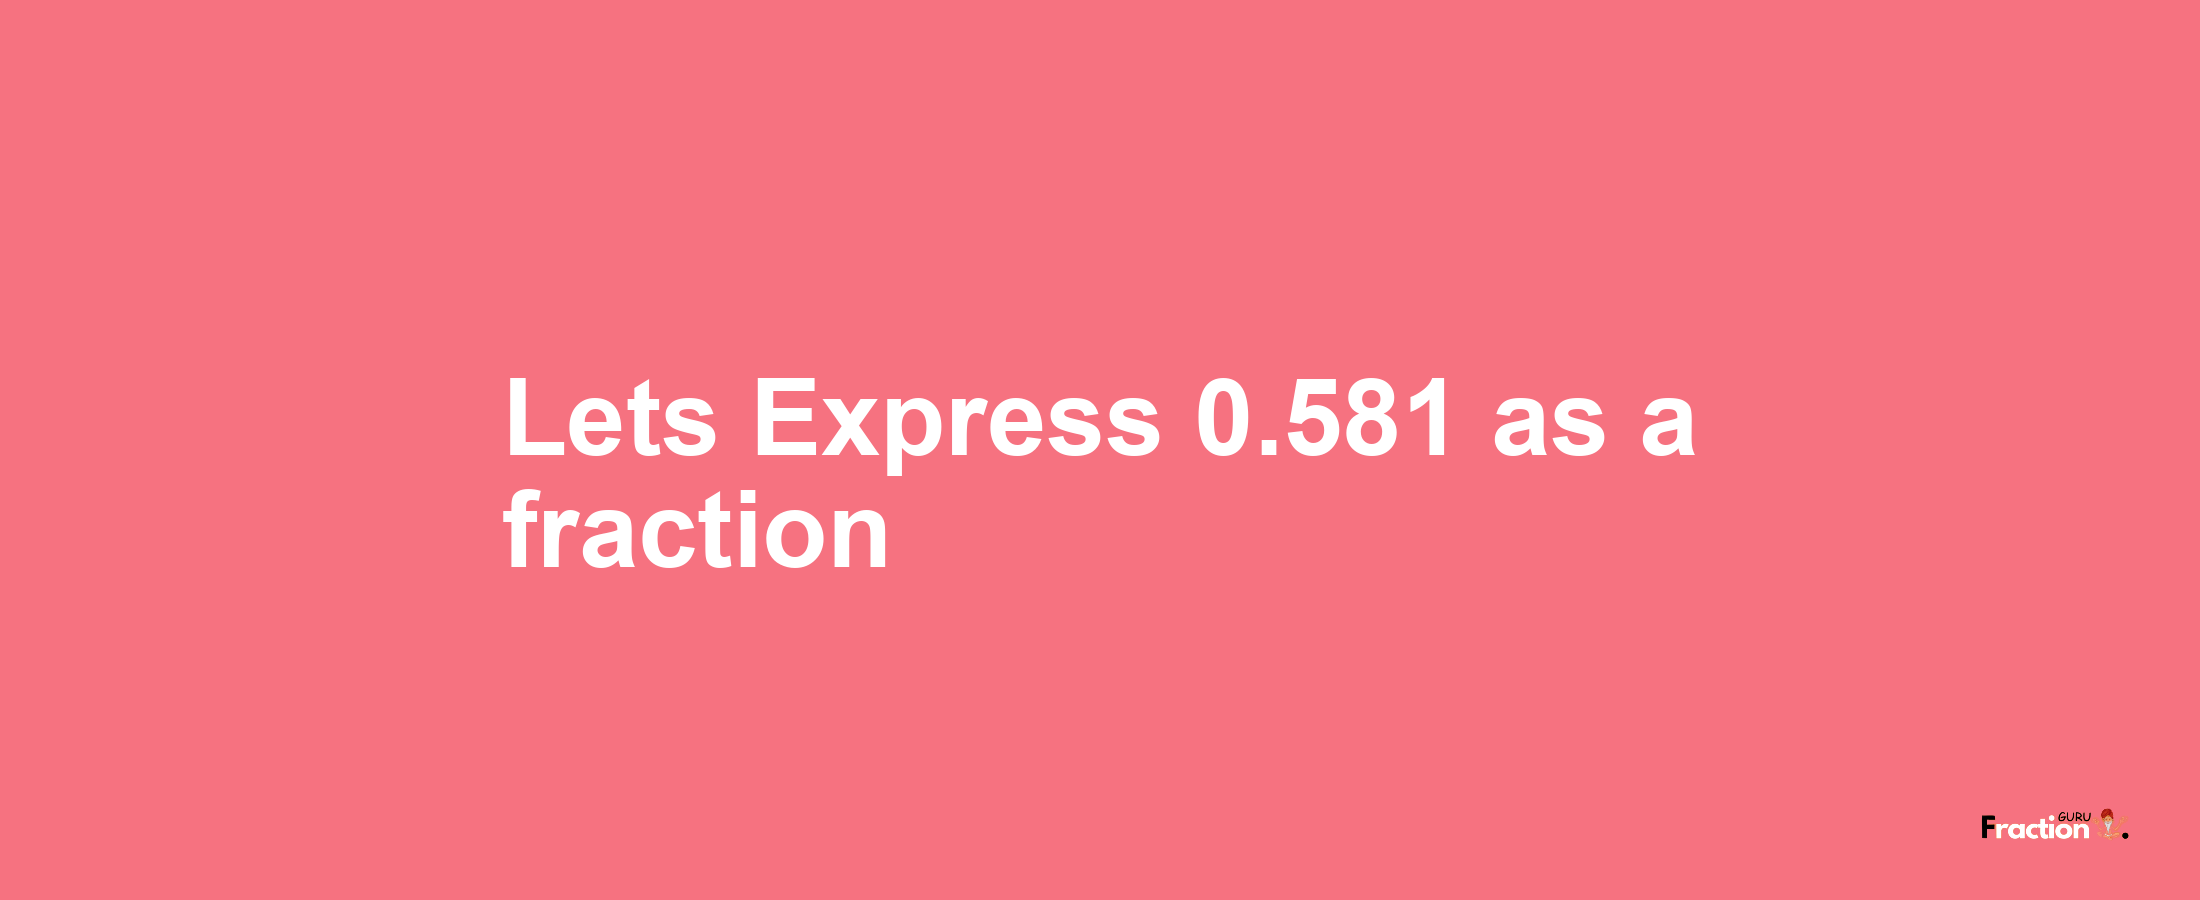 Lets Express 0.581 as afraction